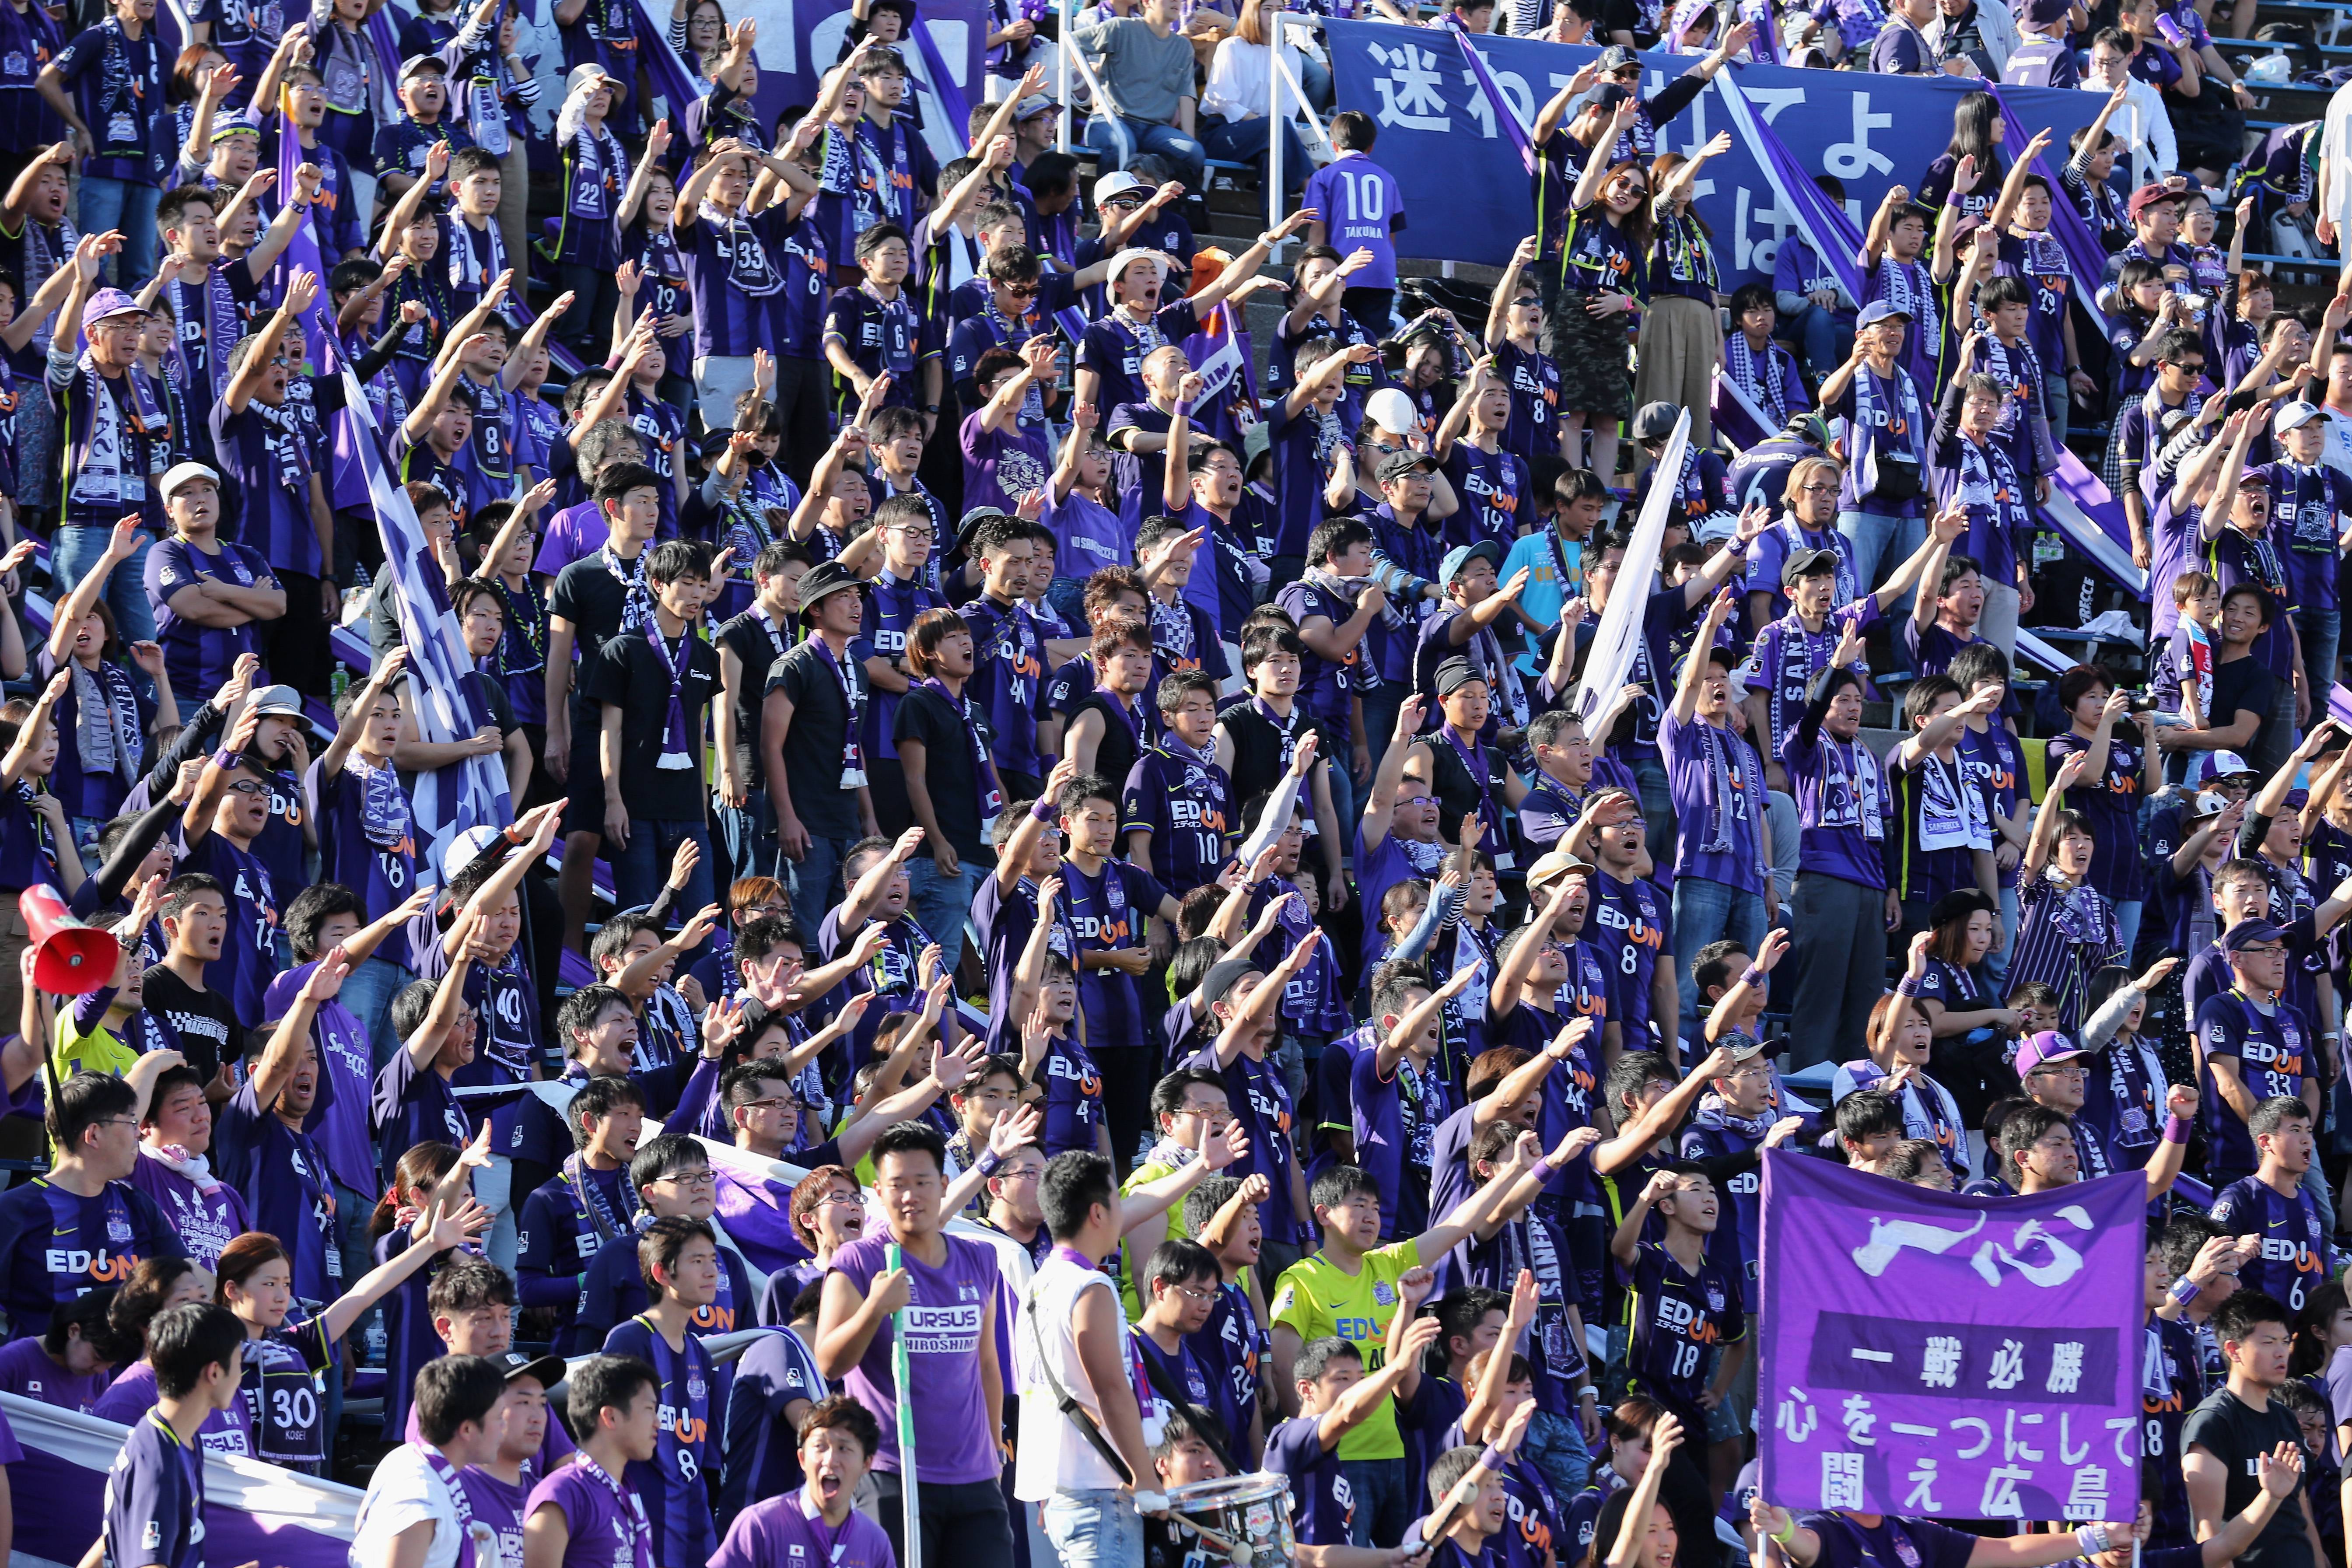 Sanfrecce manager Jofuku: Teerasil capable of much more